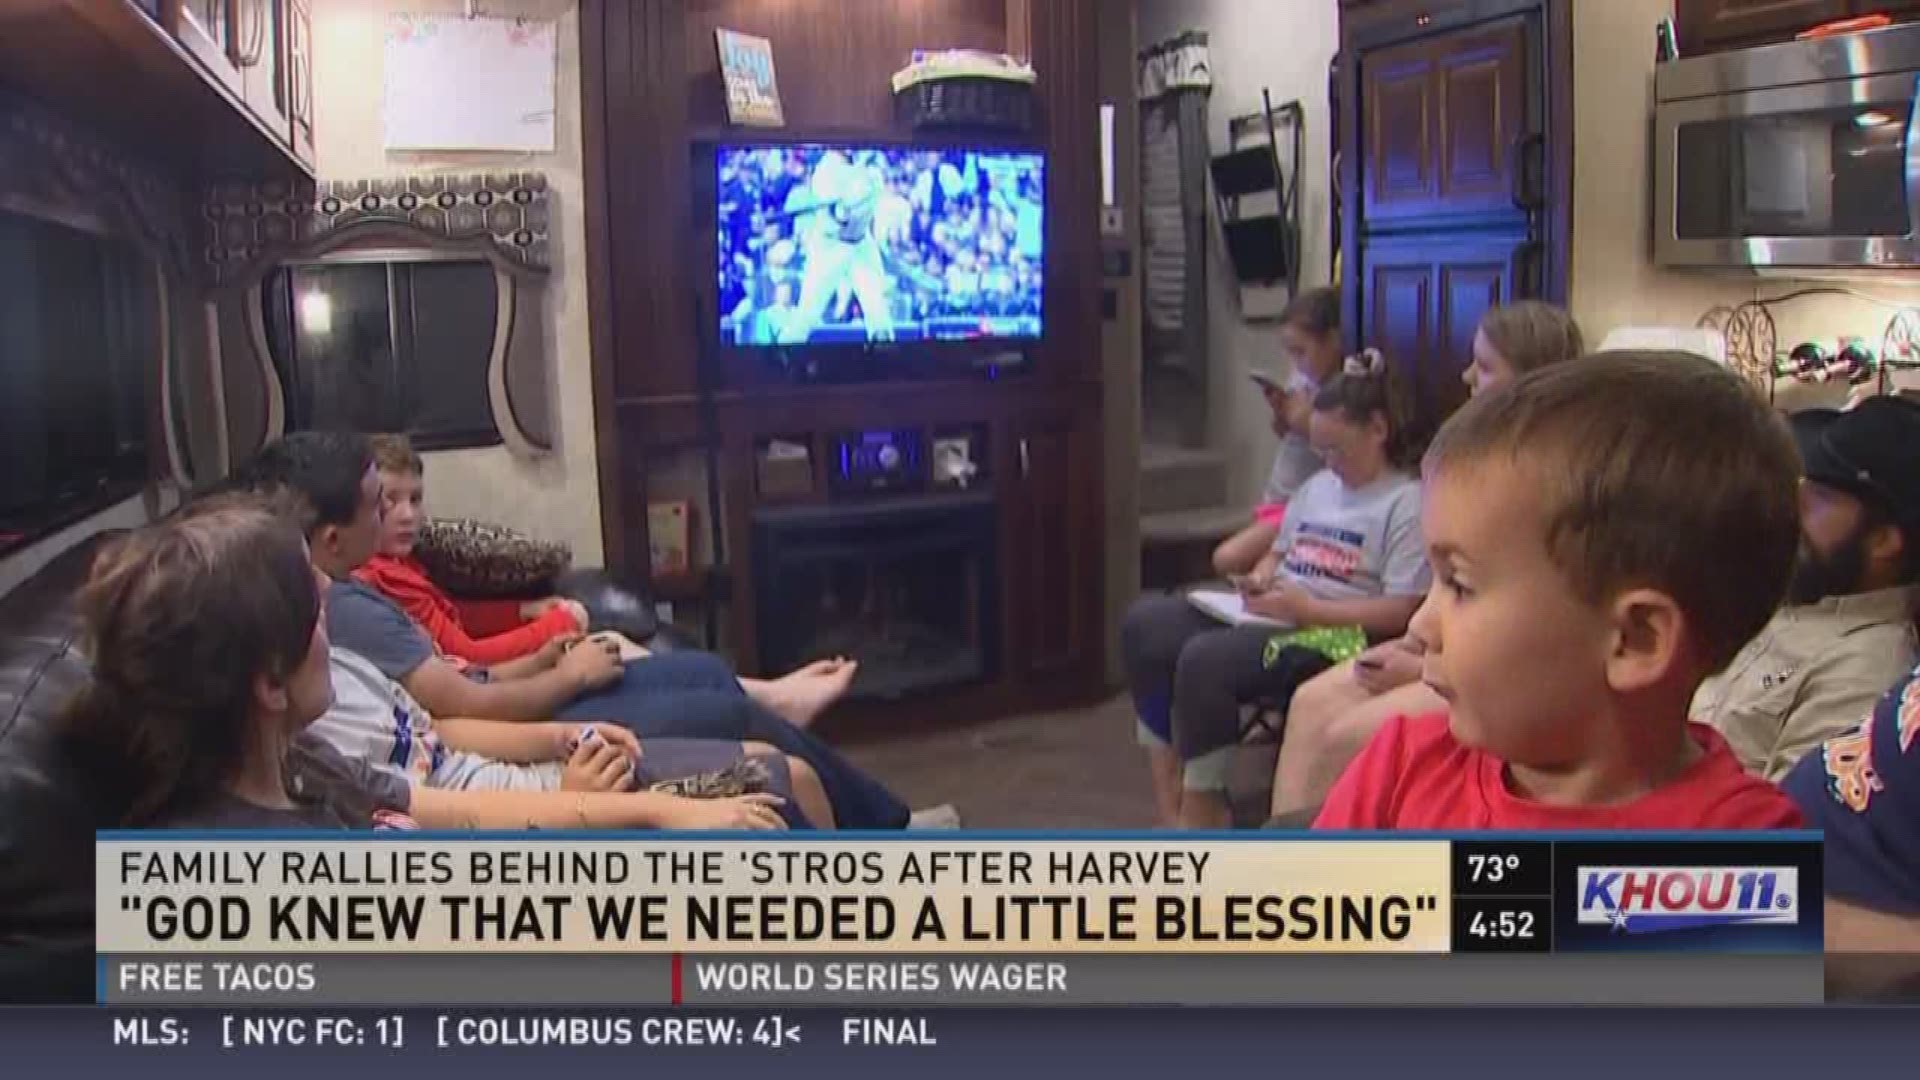 'God knew that we needed a little blessing'. Local family rallies behind the 'Stros after Harvey. 